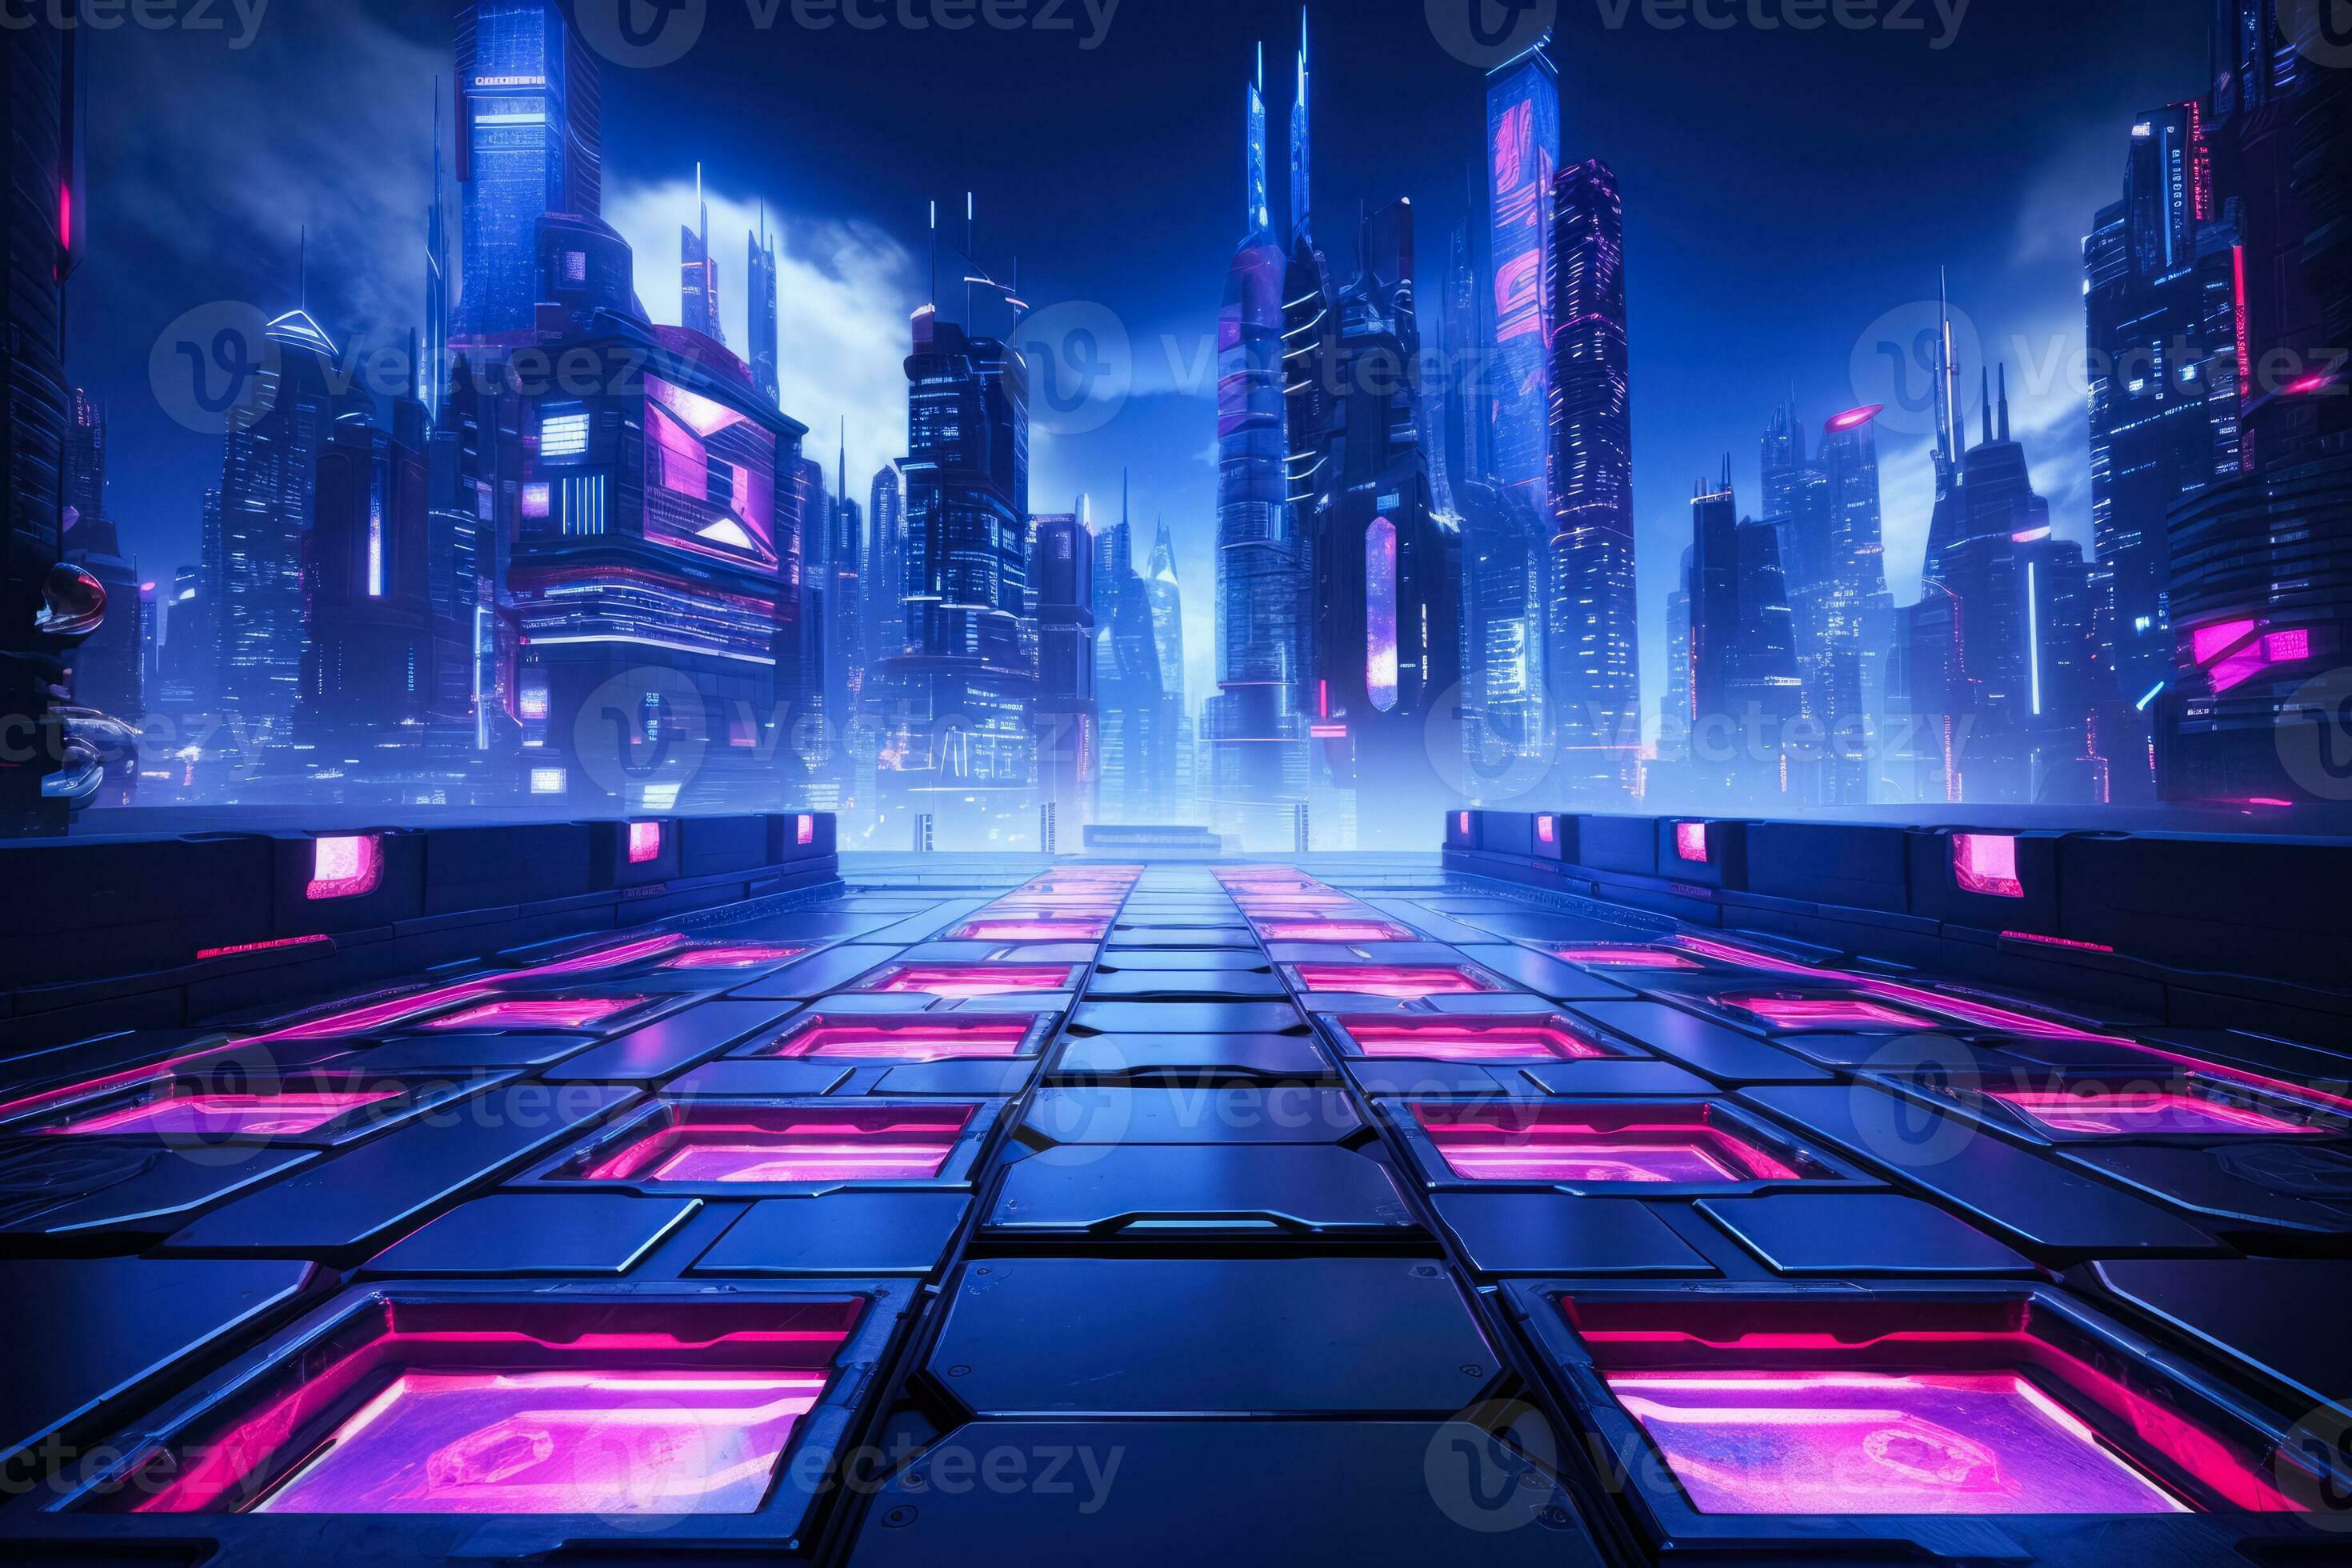 Premium Photo  3d illustration rendering of futuristic cyberpunk city gaming  wallpaper scifi background a esports gamer banner sign of neon glow  technology and network